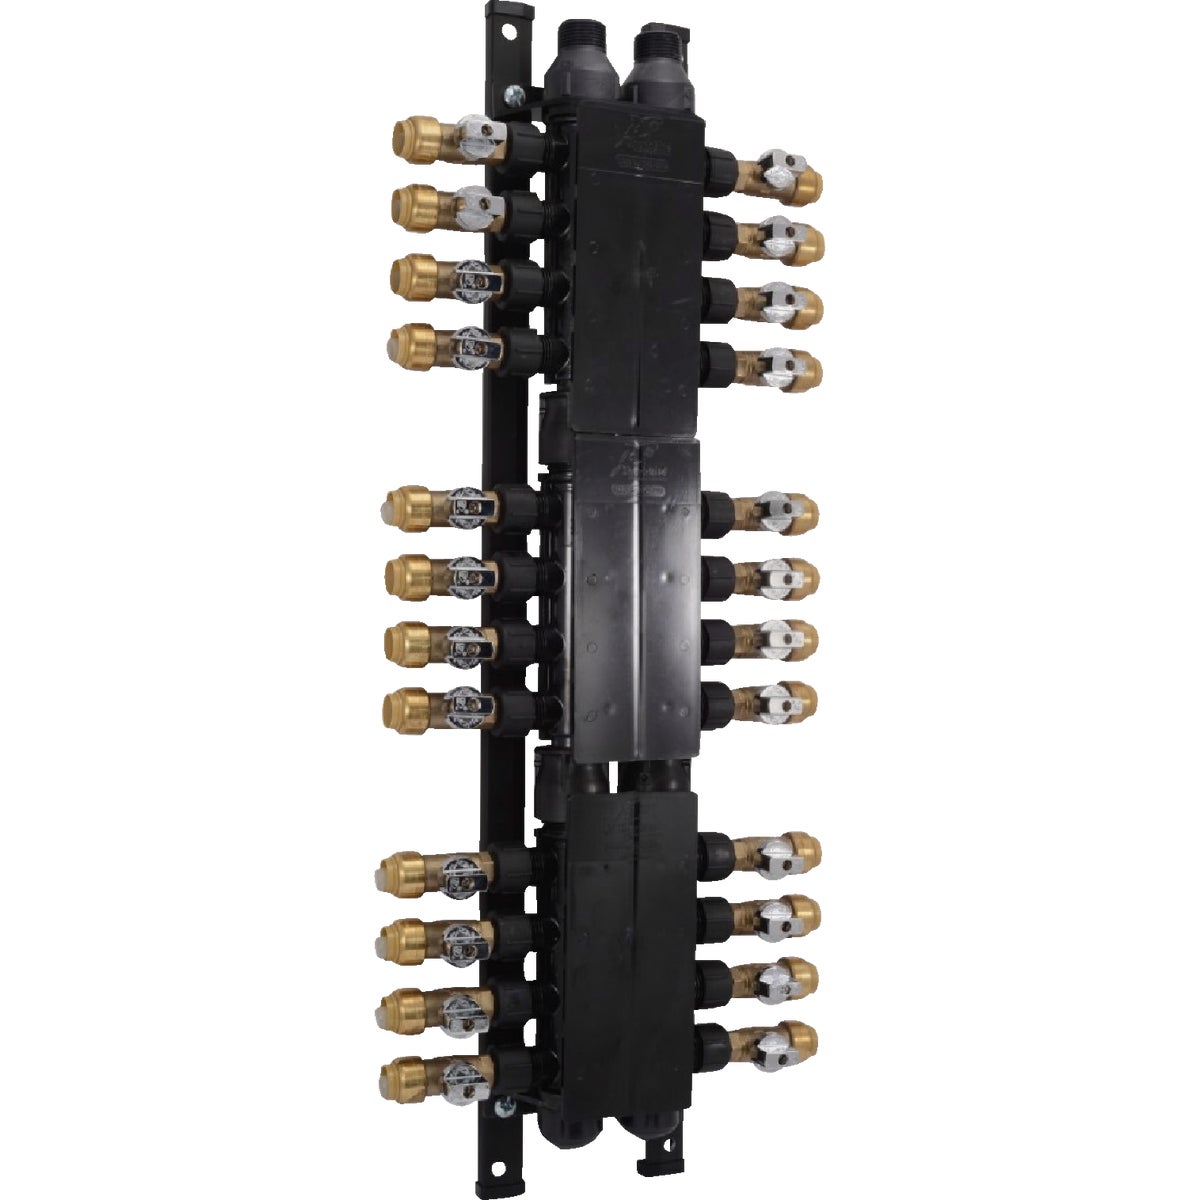 SharkBite 3/4 In. x 1/2 In. 24-Port Push-to-Connect Manifold with Brass Ball Shutoff Valves